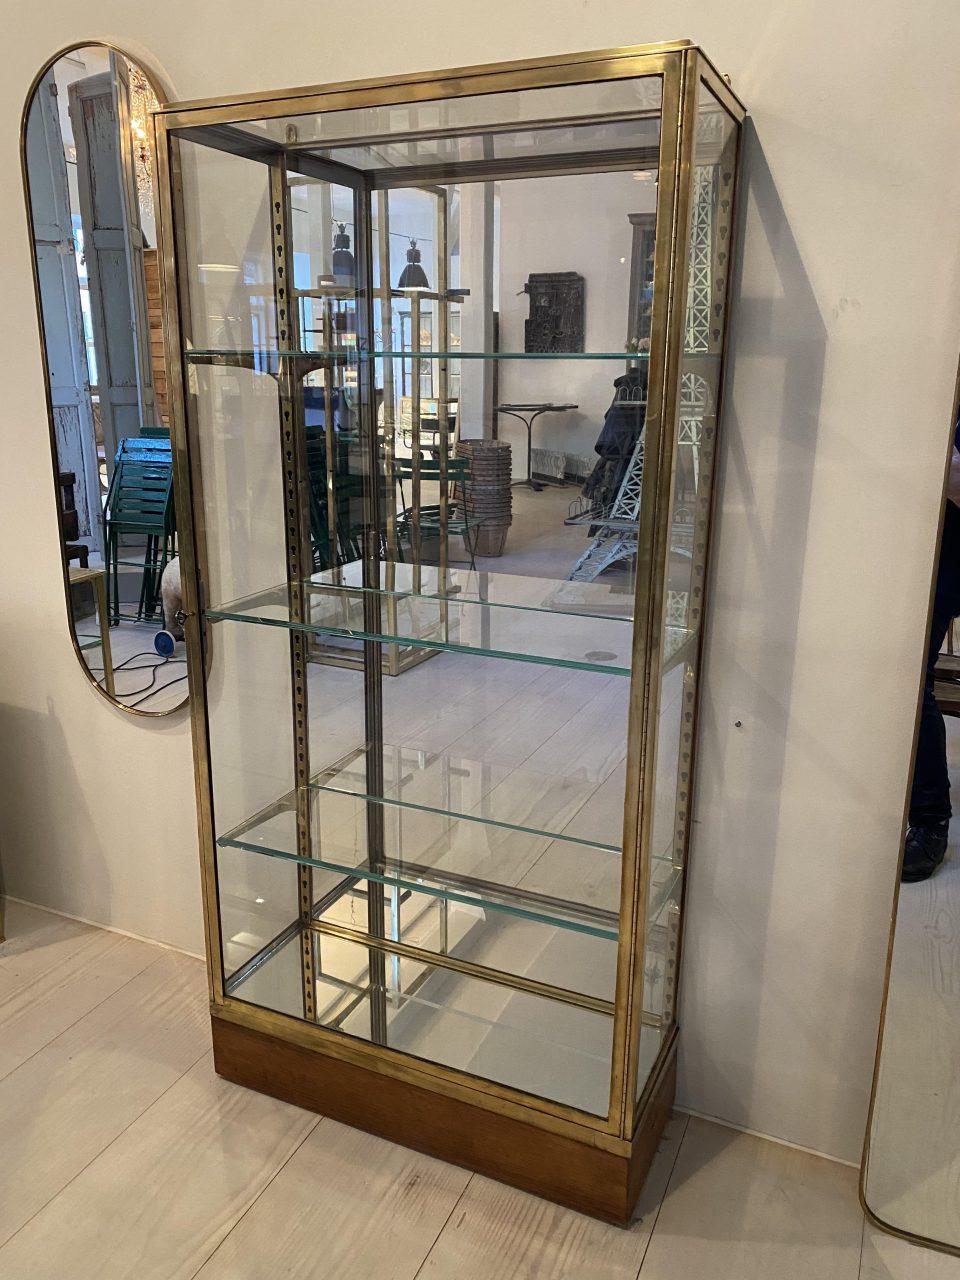 Handsome and well-proportioned display cabinet from France circa 1930s in a stringet Art Deco style. Sleek brass framed profile which comes with its associated key, 3 beautiful faceted glass shelves and adjustable shelf brackets in brass, and a